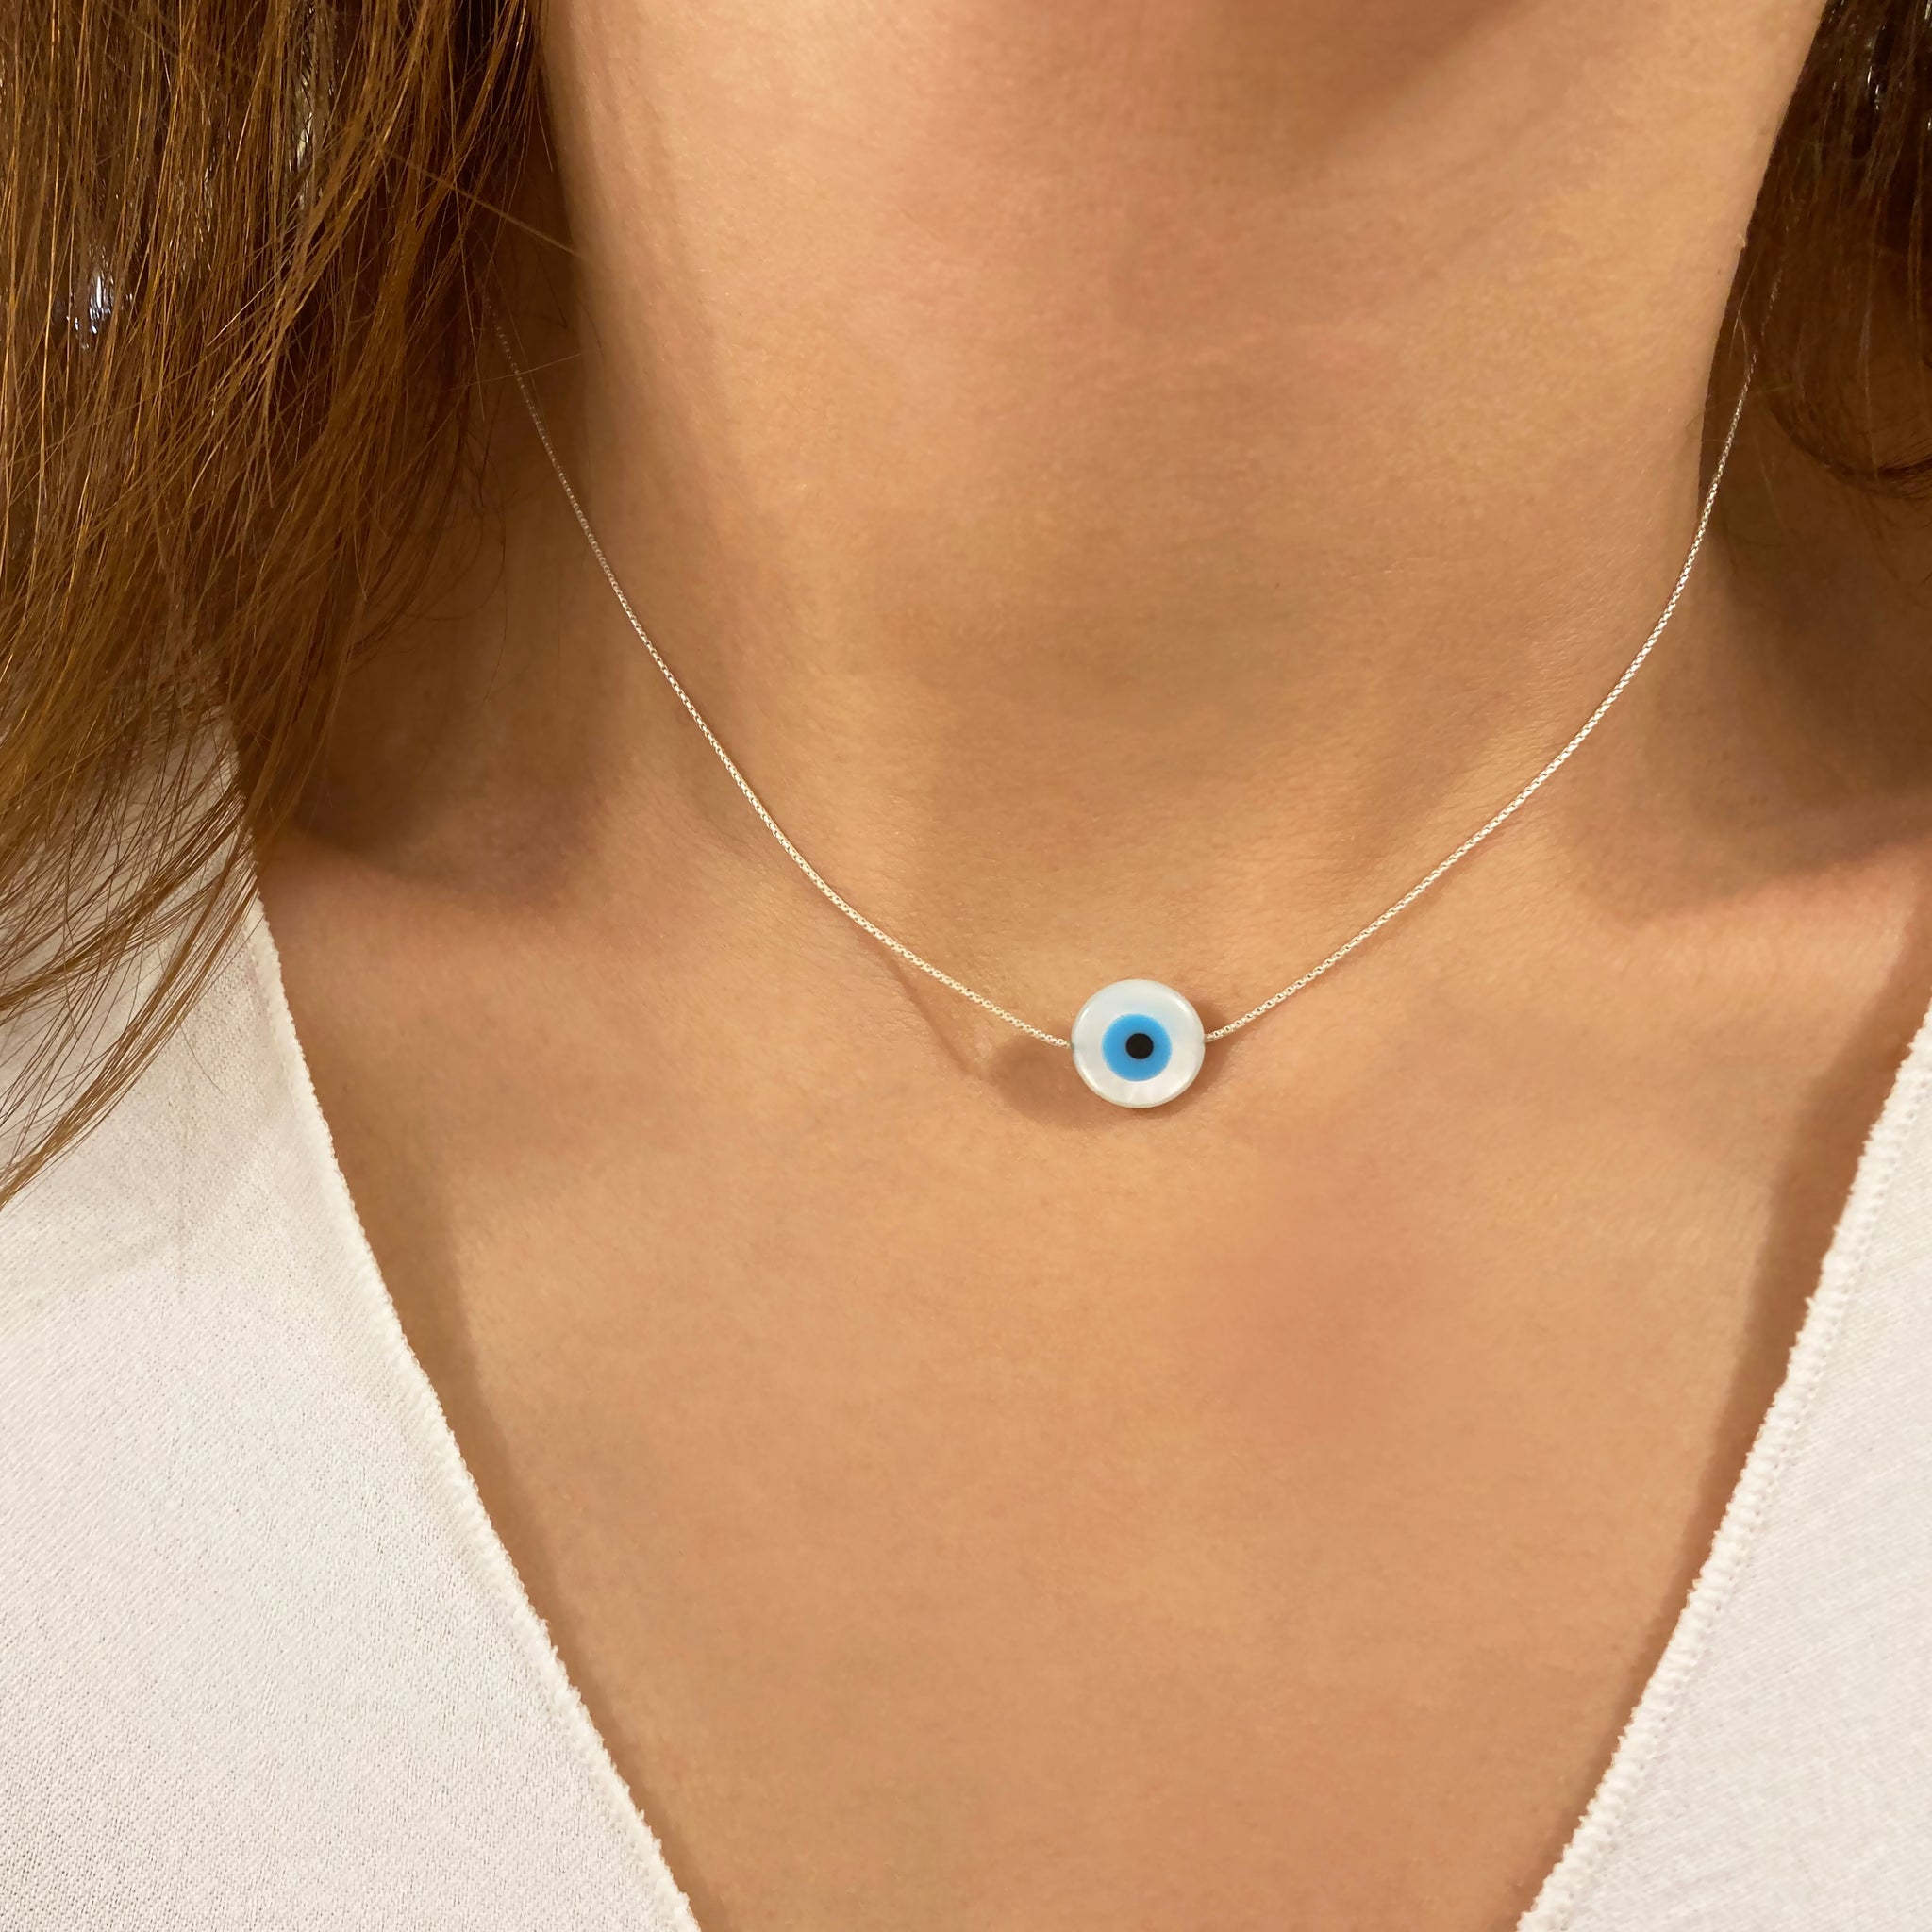 Evil Eye Choker Necklace - Silver 925 - Mother of Pearl